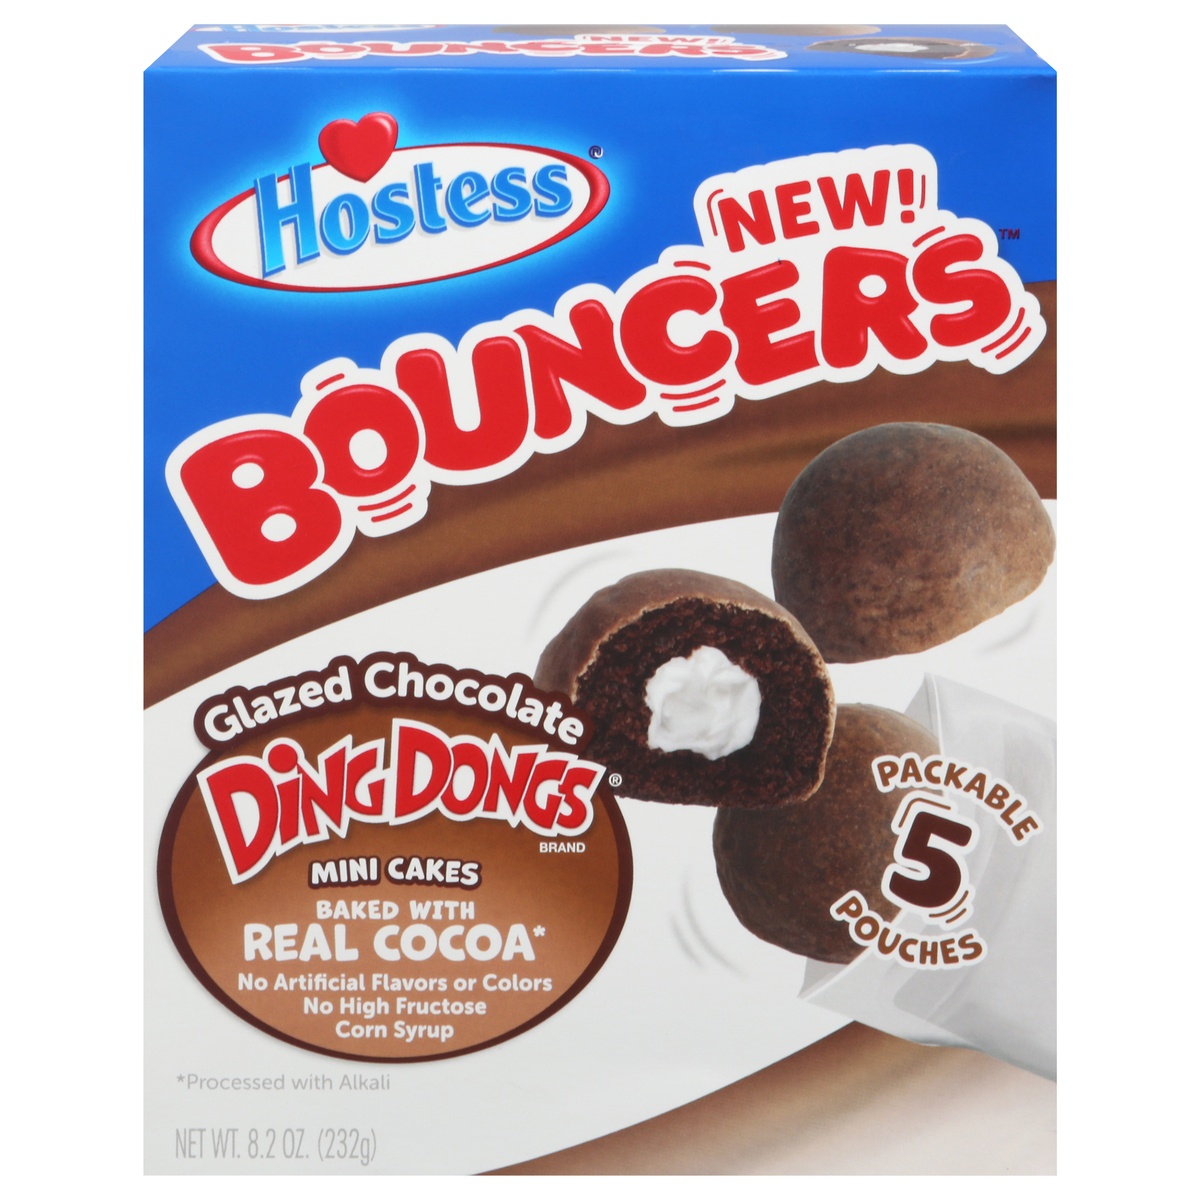 slide 1 of 11, Hostess Bouncers Glazed Chocolate Ding Dongs, 5 ct  9.95 oz